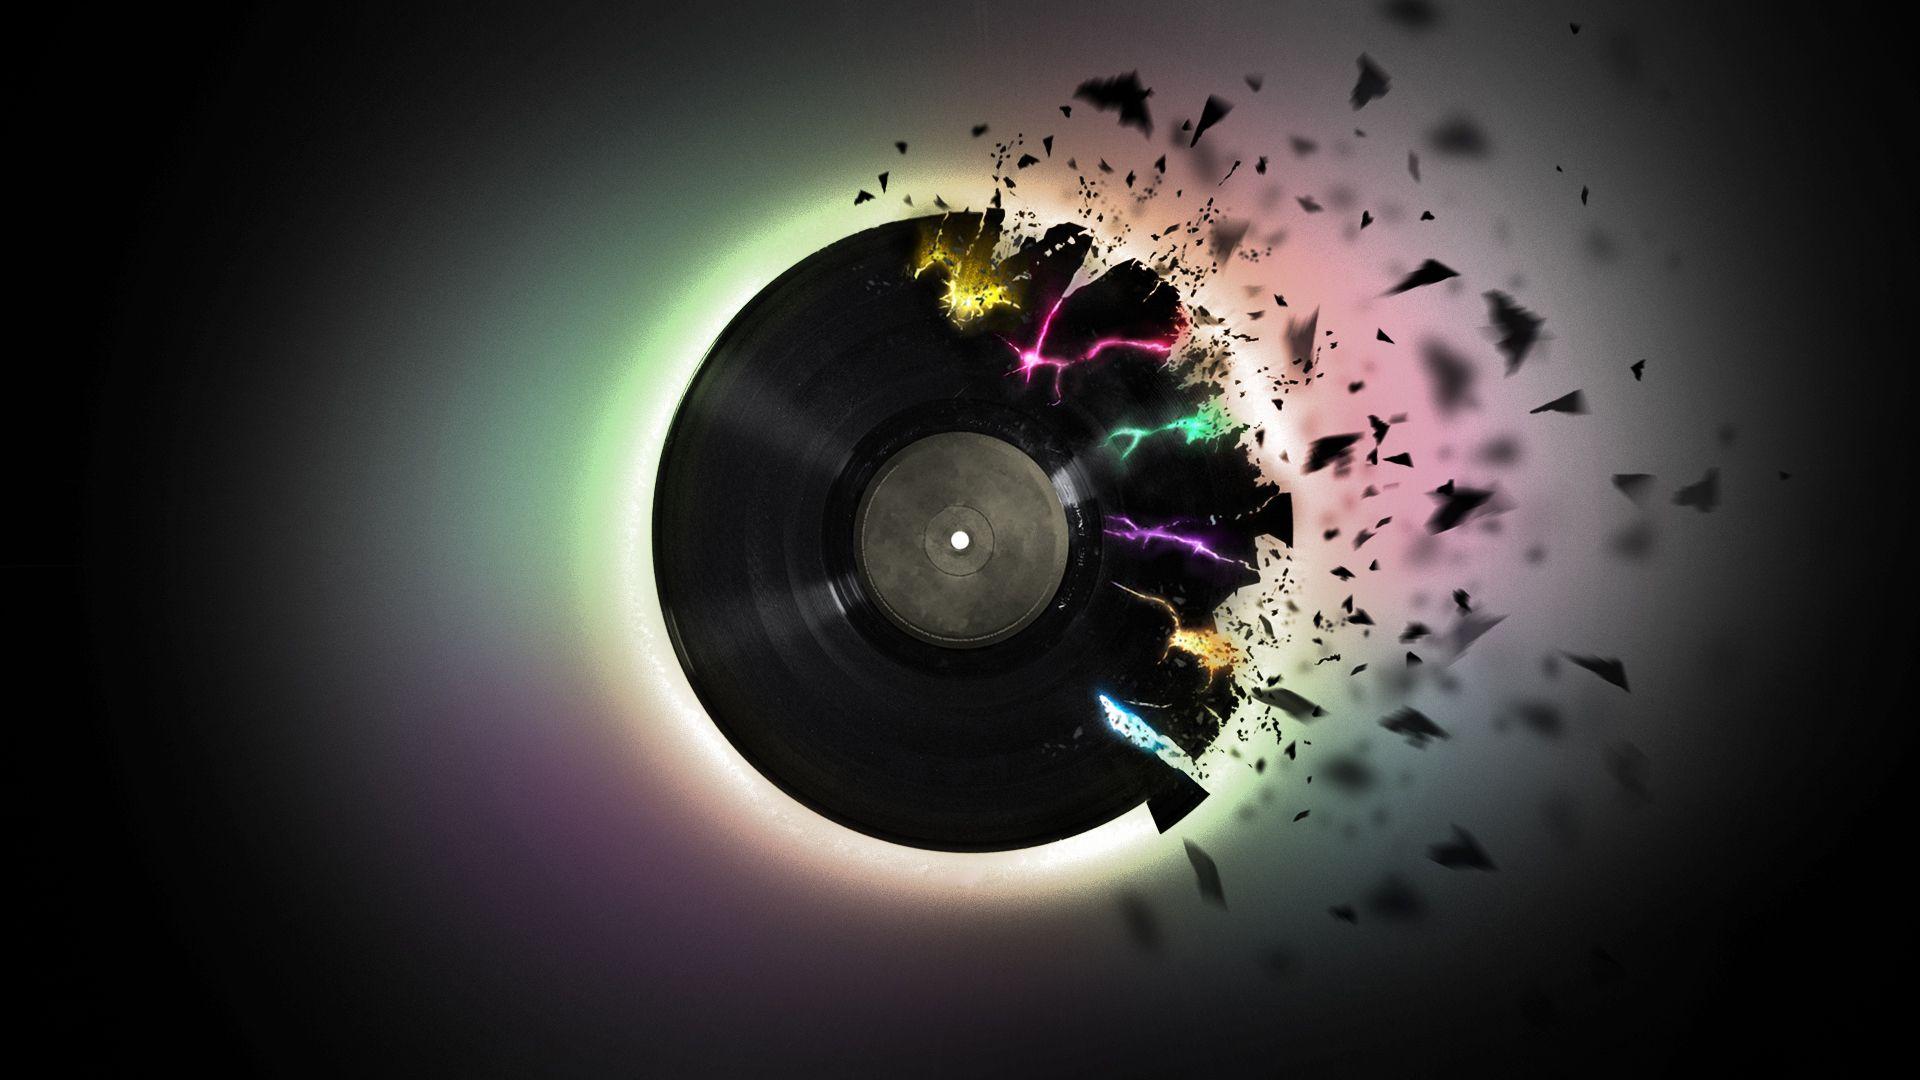 Vinyl Record Wallpapers Top Free Vinyl Record Backgrounds